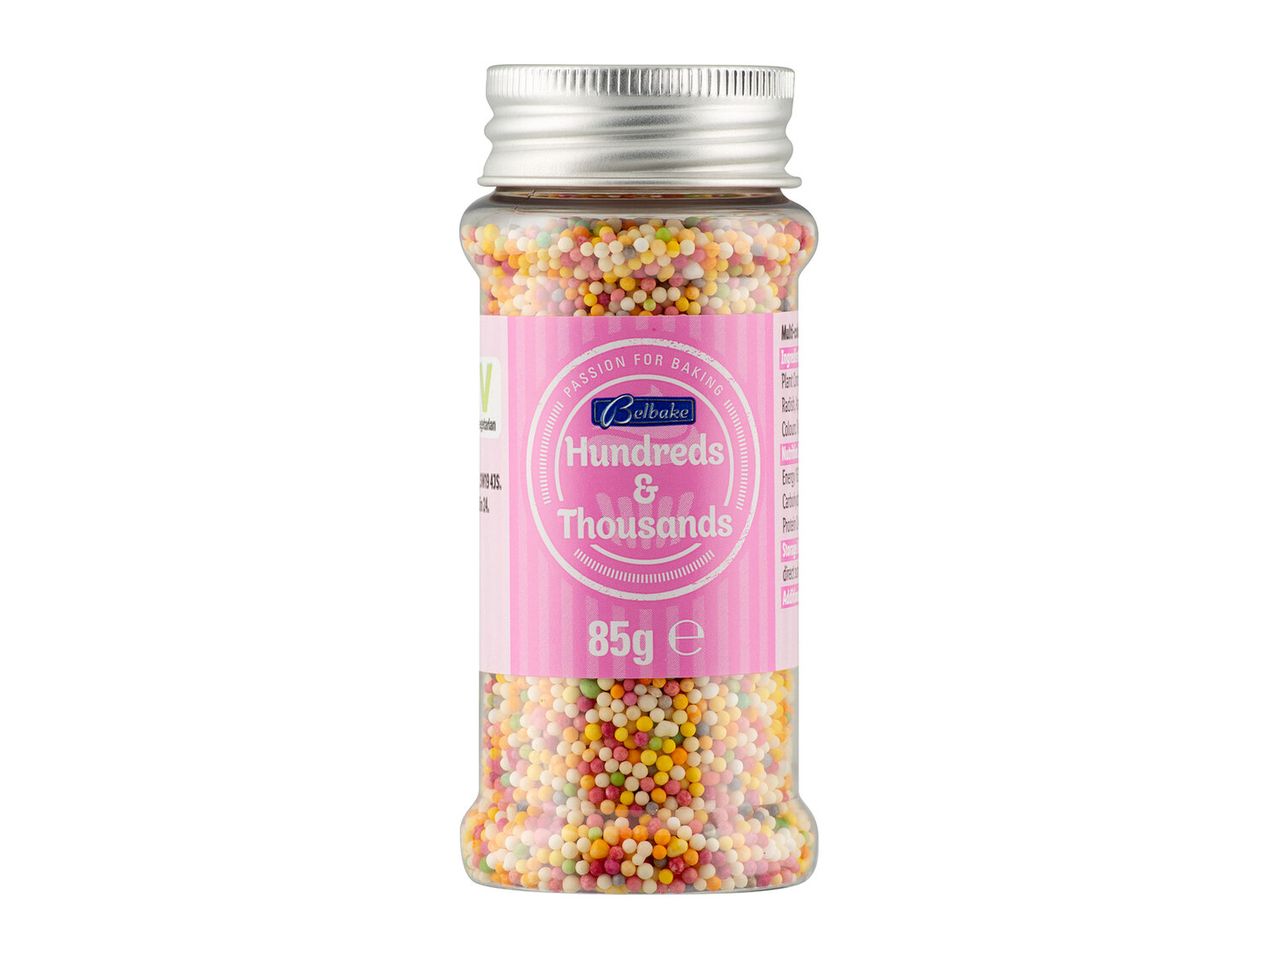 Go to full screen view: Belbake Sprinkles assorted - Image 1